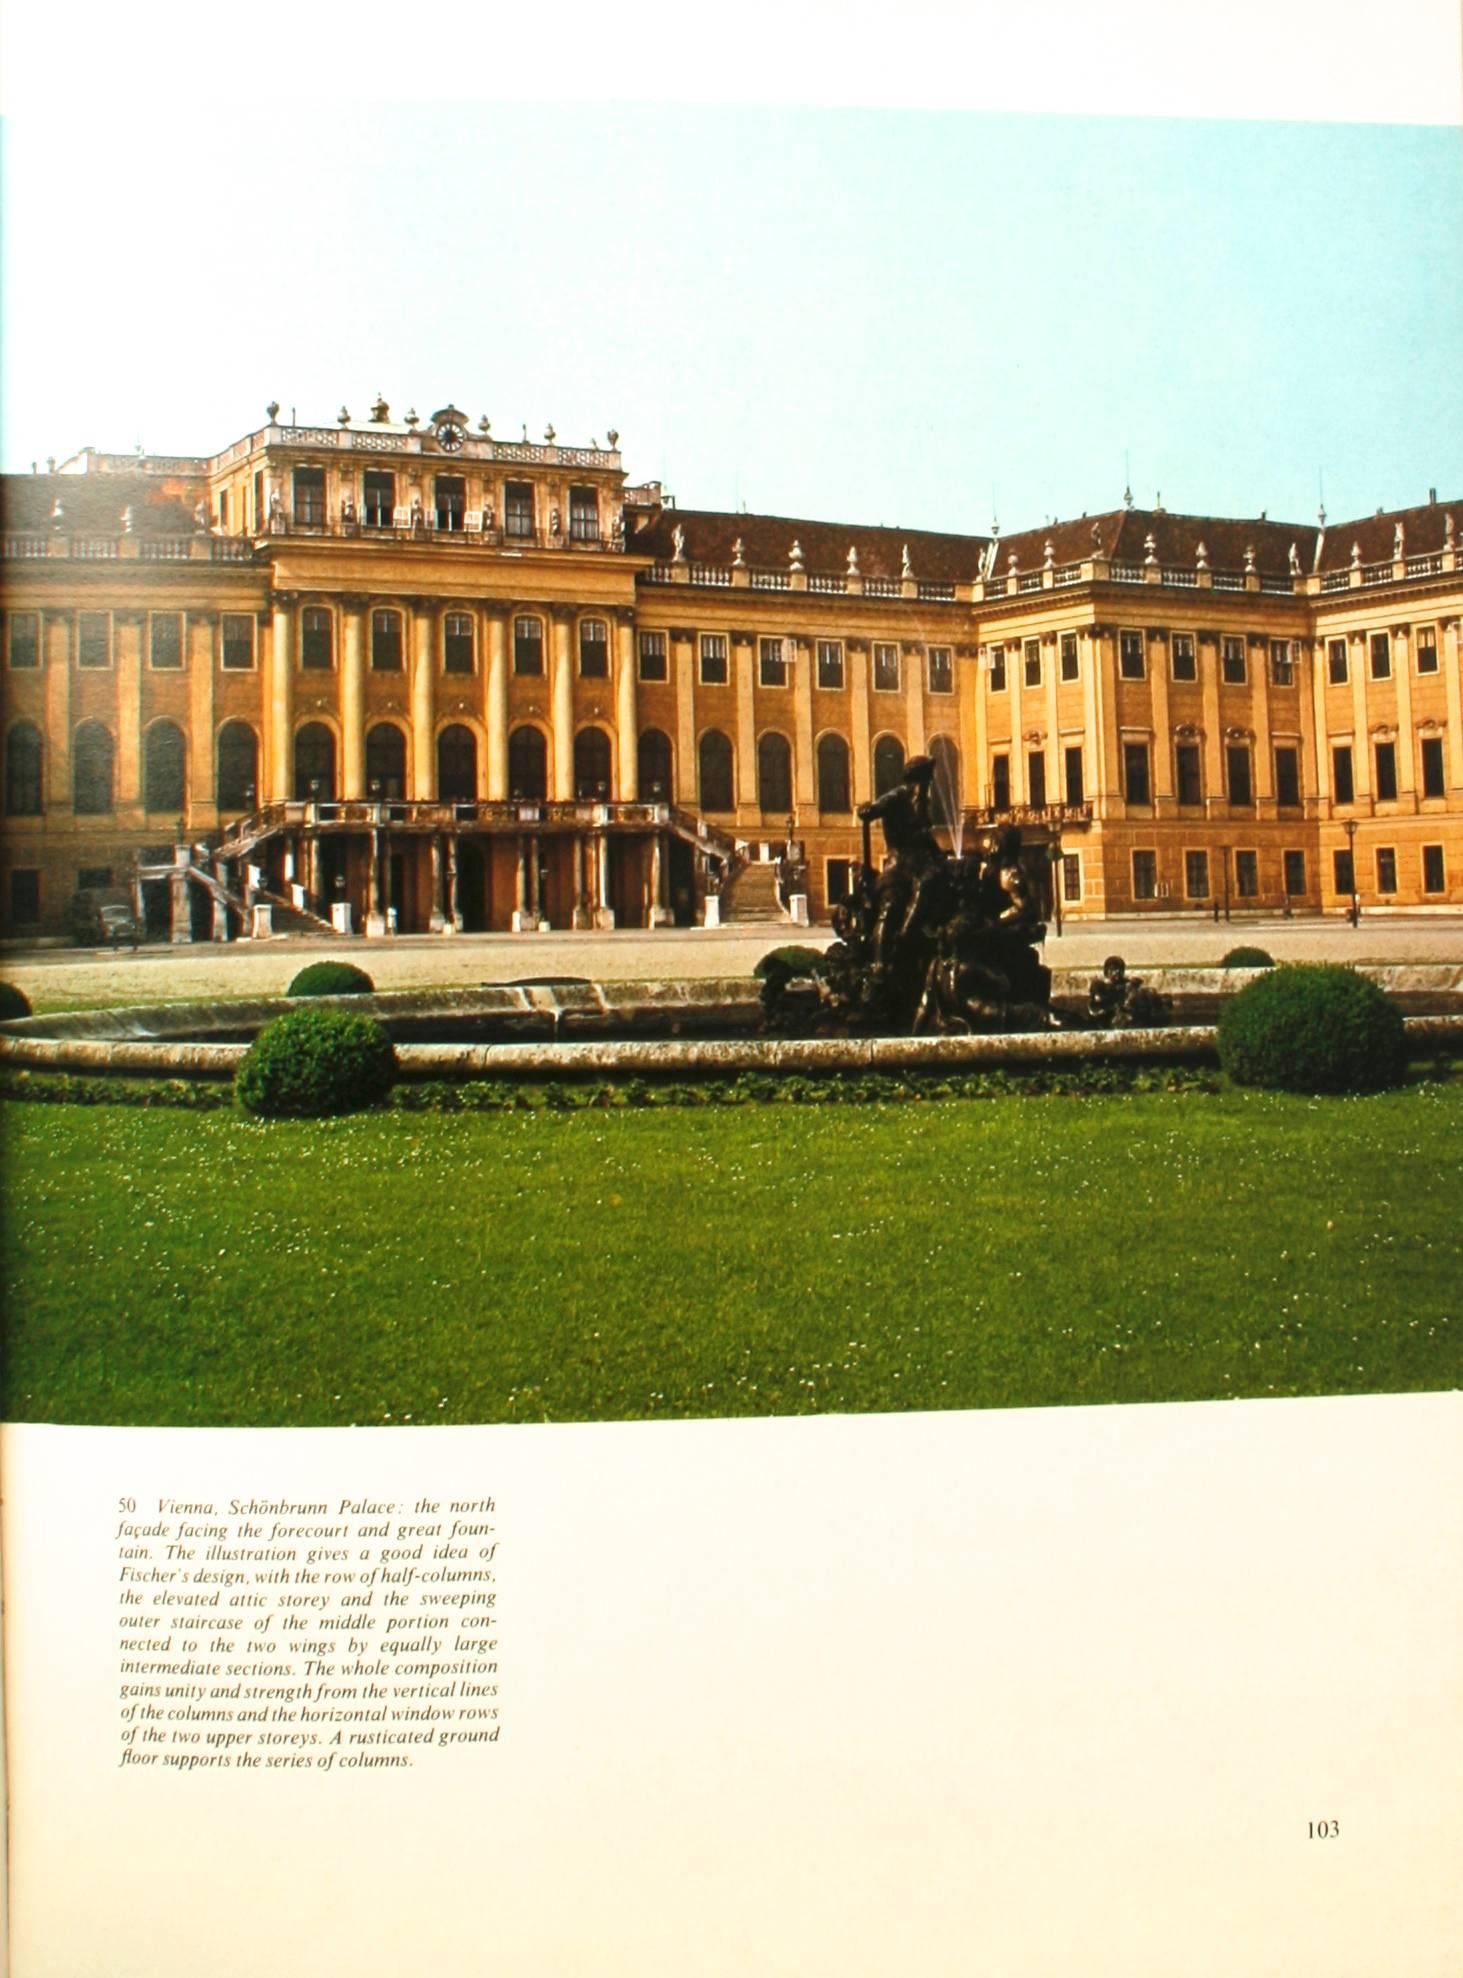 Palaces of Europe. Secaucas: Chartwell Books, 1978. First edition hardcover with dust jacket, 186 pp. The history and development of palace architecture in Europe during the 17th and 18th centuries. Houses for the aristocracy originated in Italy and